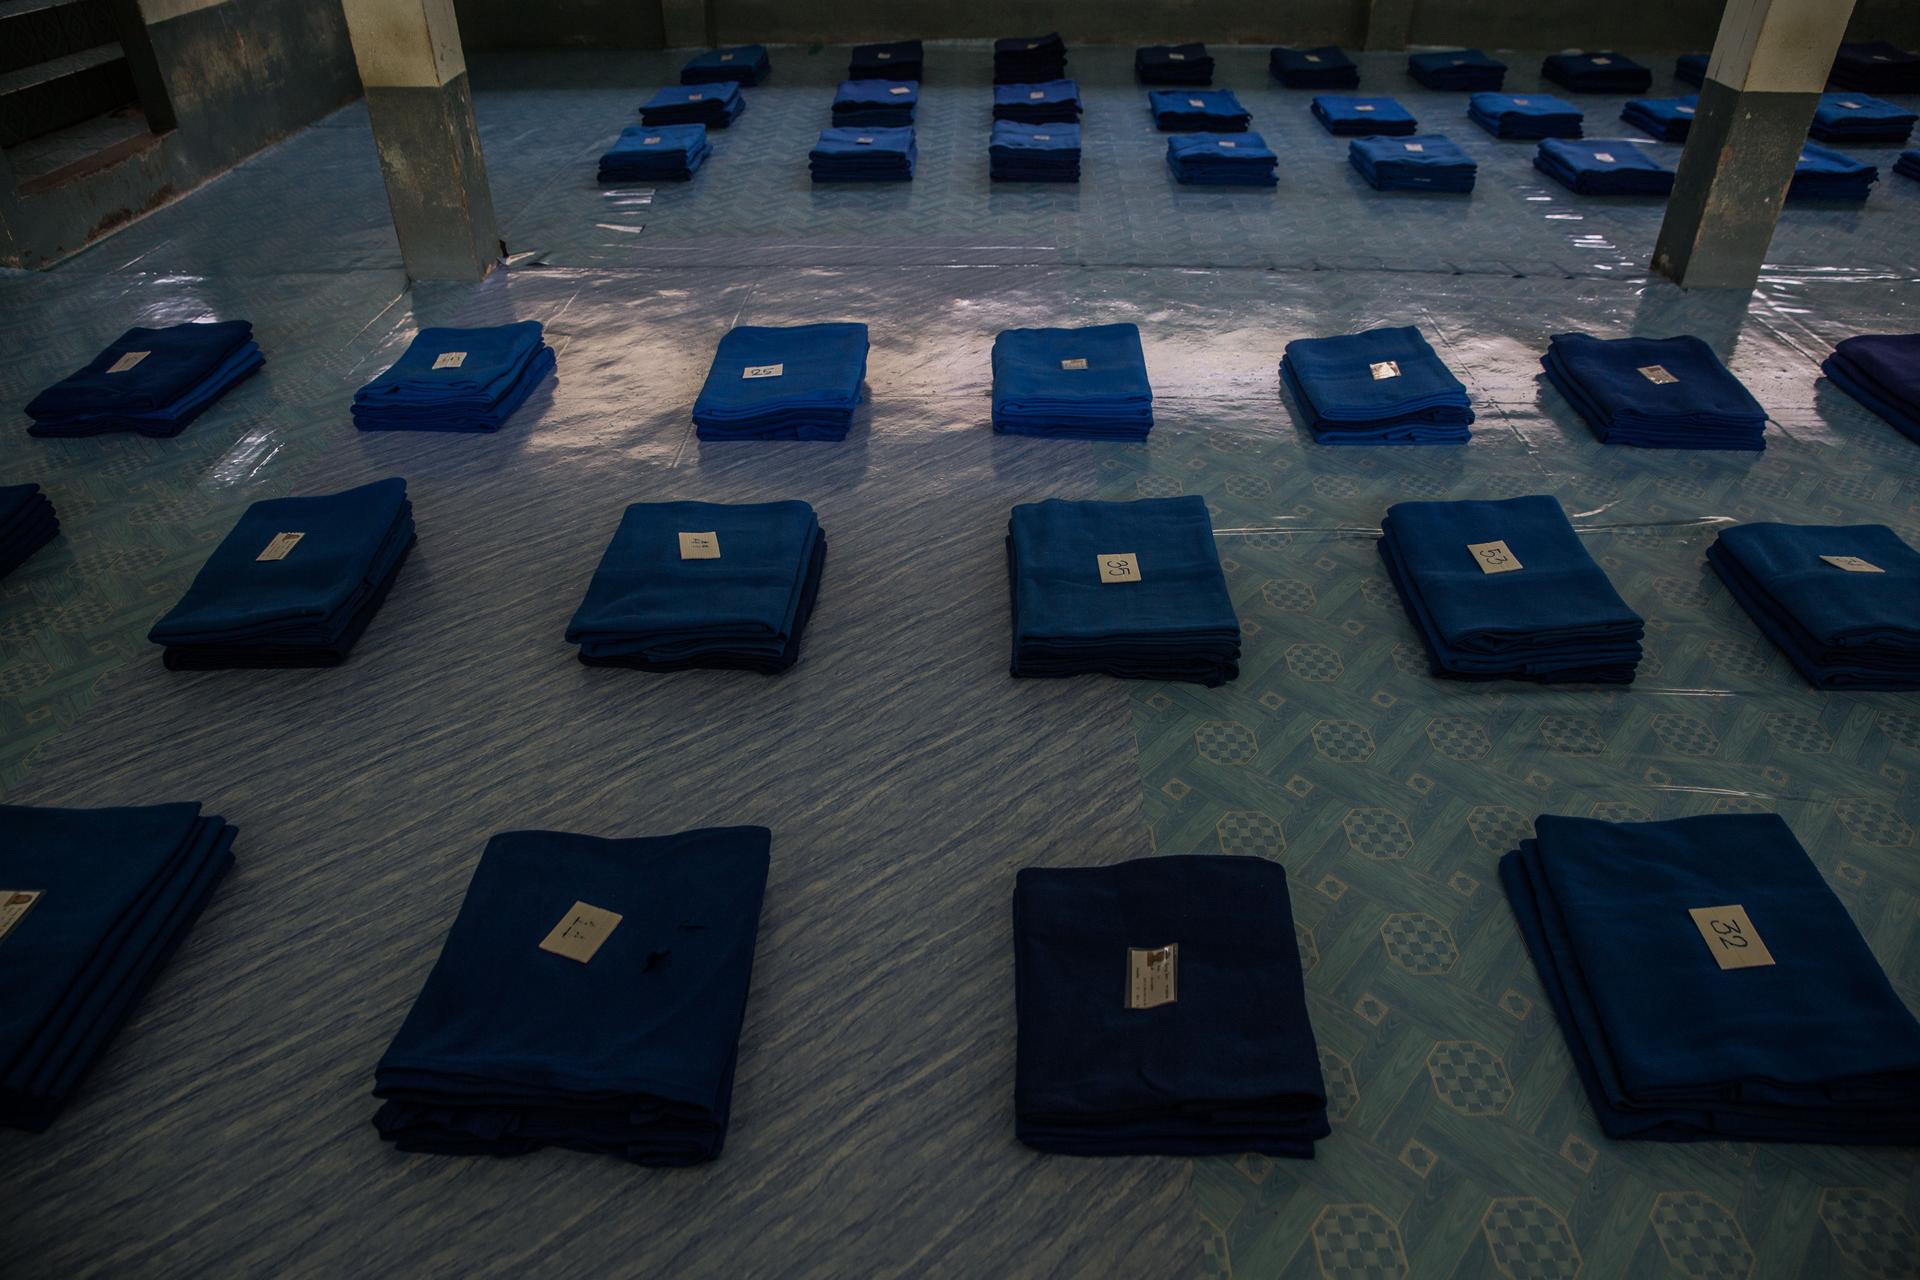 Blue blankets are folded in tidy rows across a carpet, with a number placed atop each one.